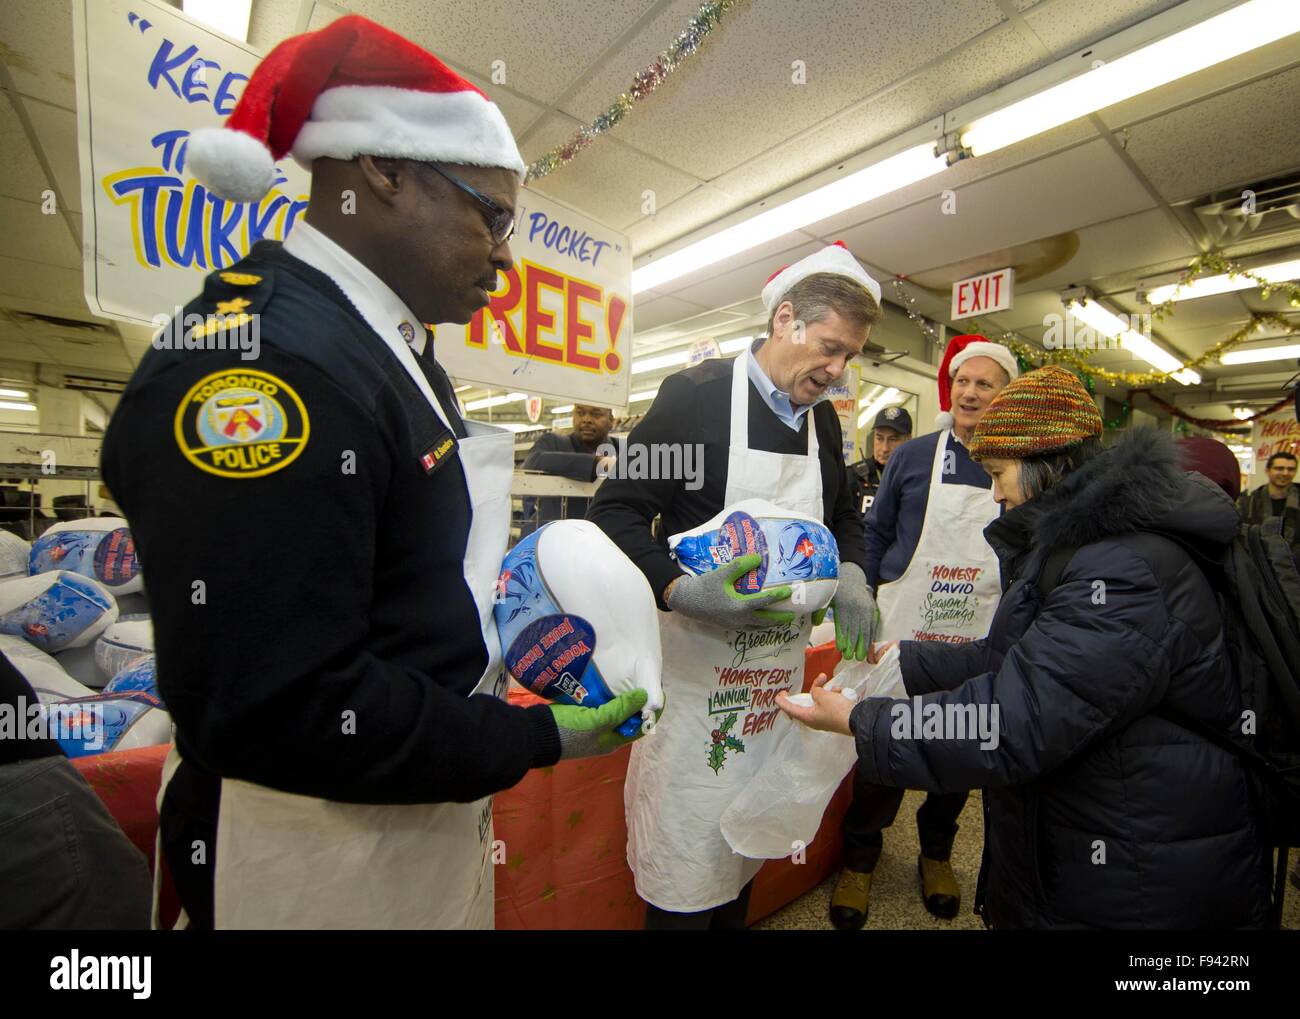 Toronto, Canada. 13th Dec, 2015. A woman receives a free turkey from Toronto Mayor John Tory (2nd L) at a local store called Honest Ed's during the store's 28th annual Christmas time turkey giveaway event in Toronto, Canada, Dec. 13, 2015. In the last giveaway of this annual event, hundreds of people around the city lined up to get one of about 1,300 free turkeys and fruitcakes from the store on Sunday. © Zou Zheng/Xinhua/Alamy Live News Stock Photo